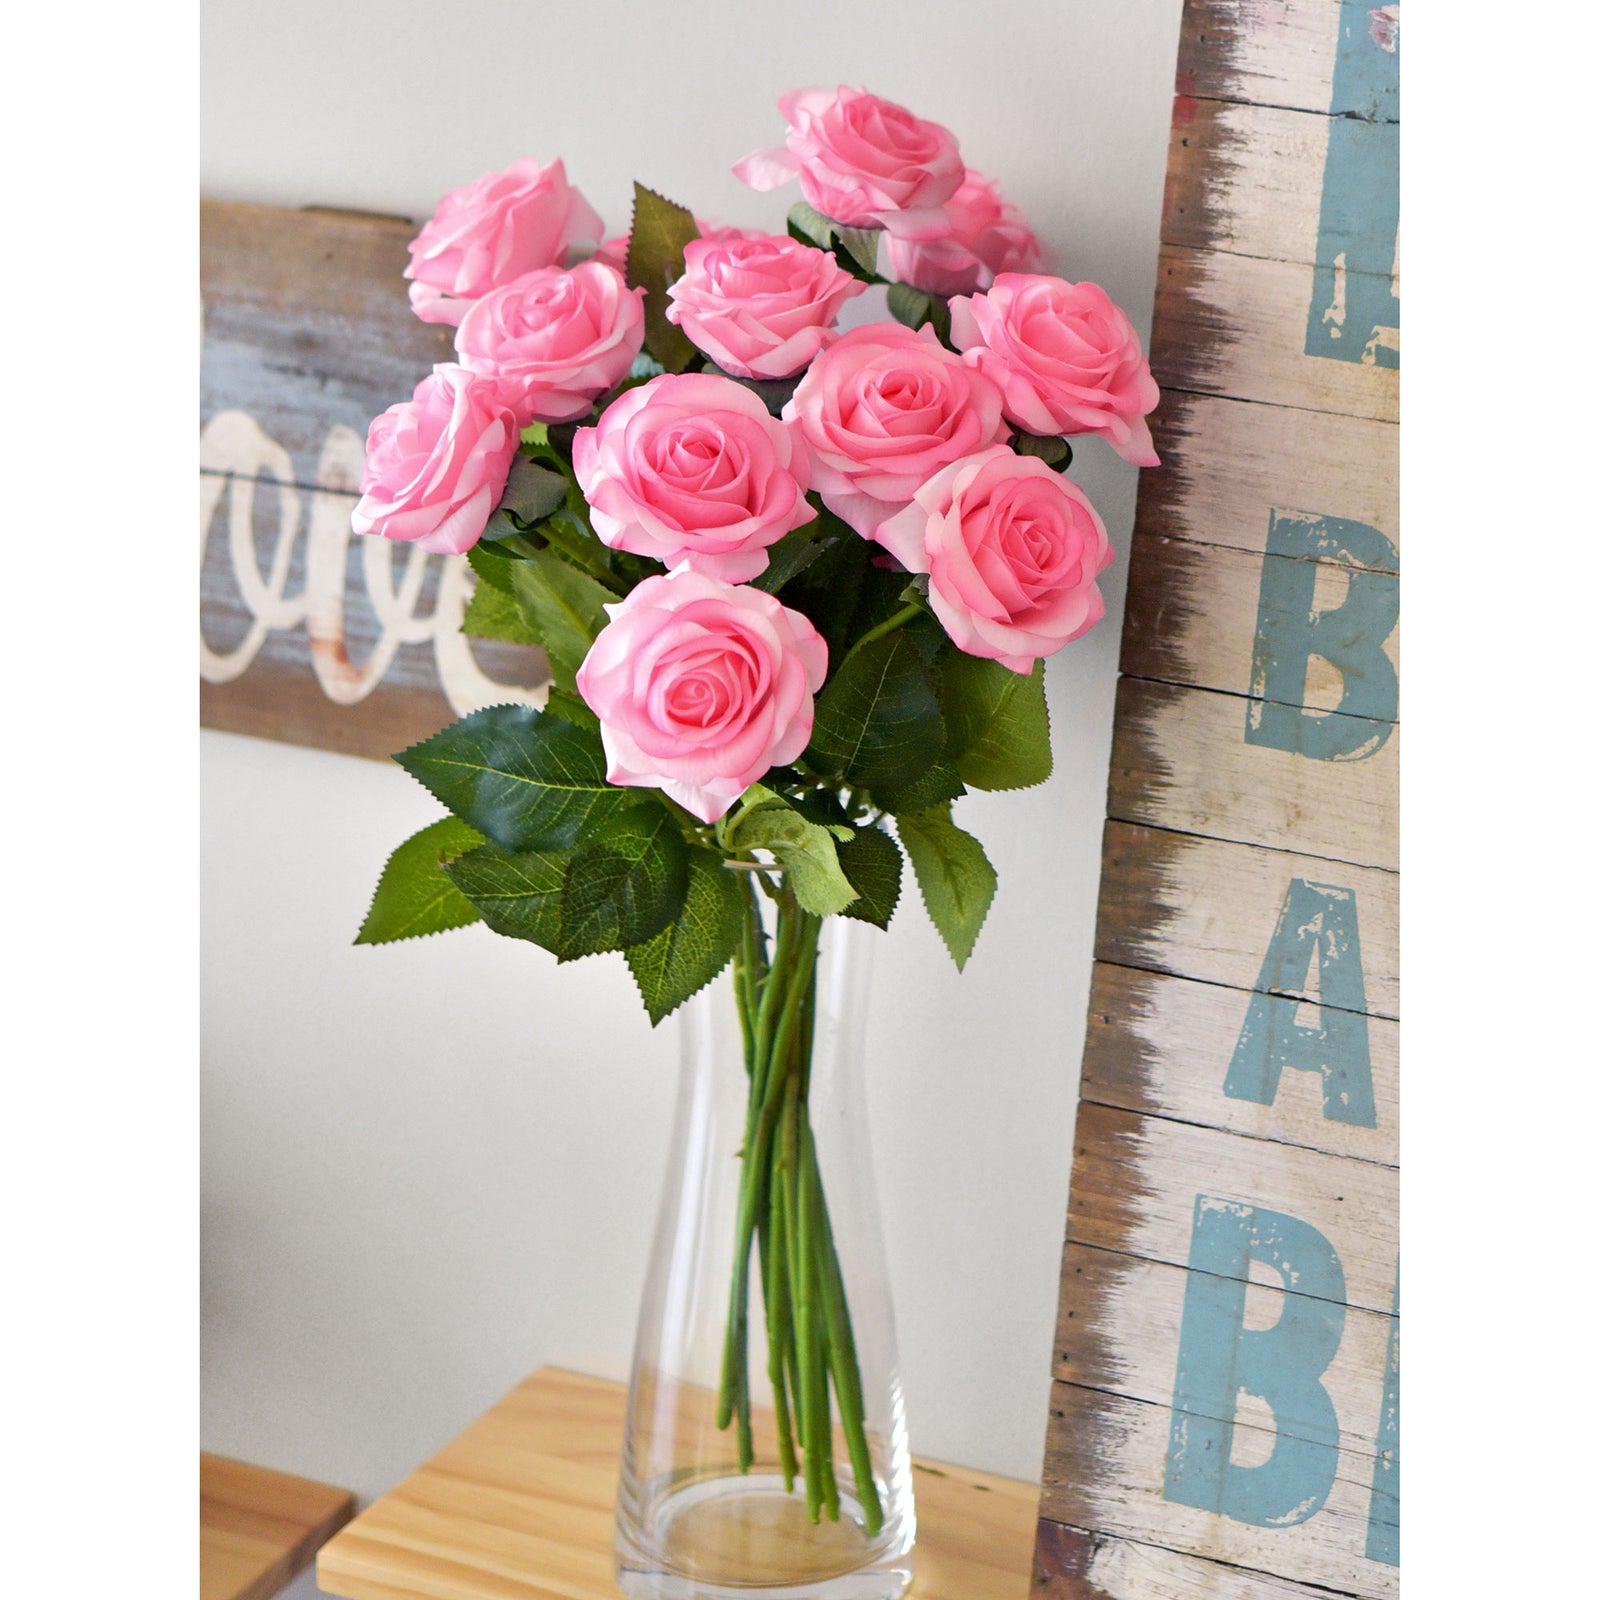 Pink Swirl Real Touch Silk Artificial Flowers ‘Petals Feel and Look like Fresh Roses 10 Stems